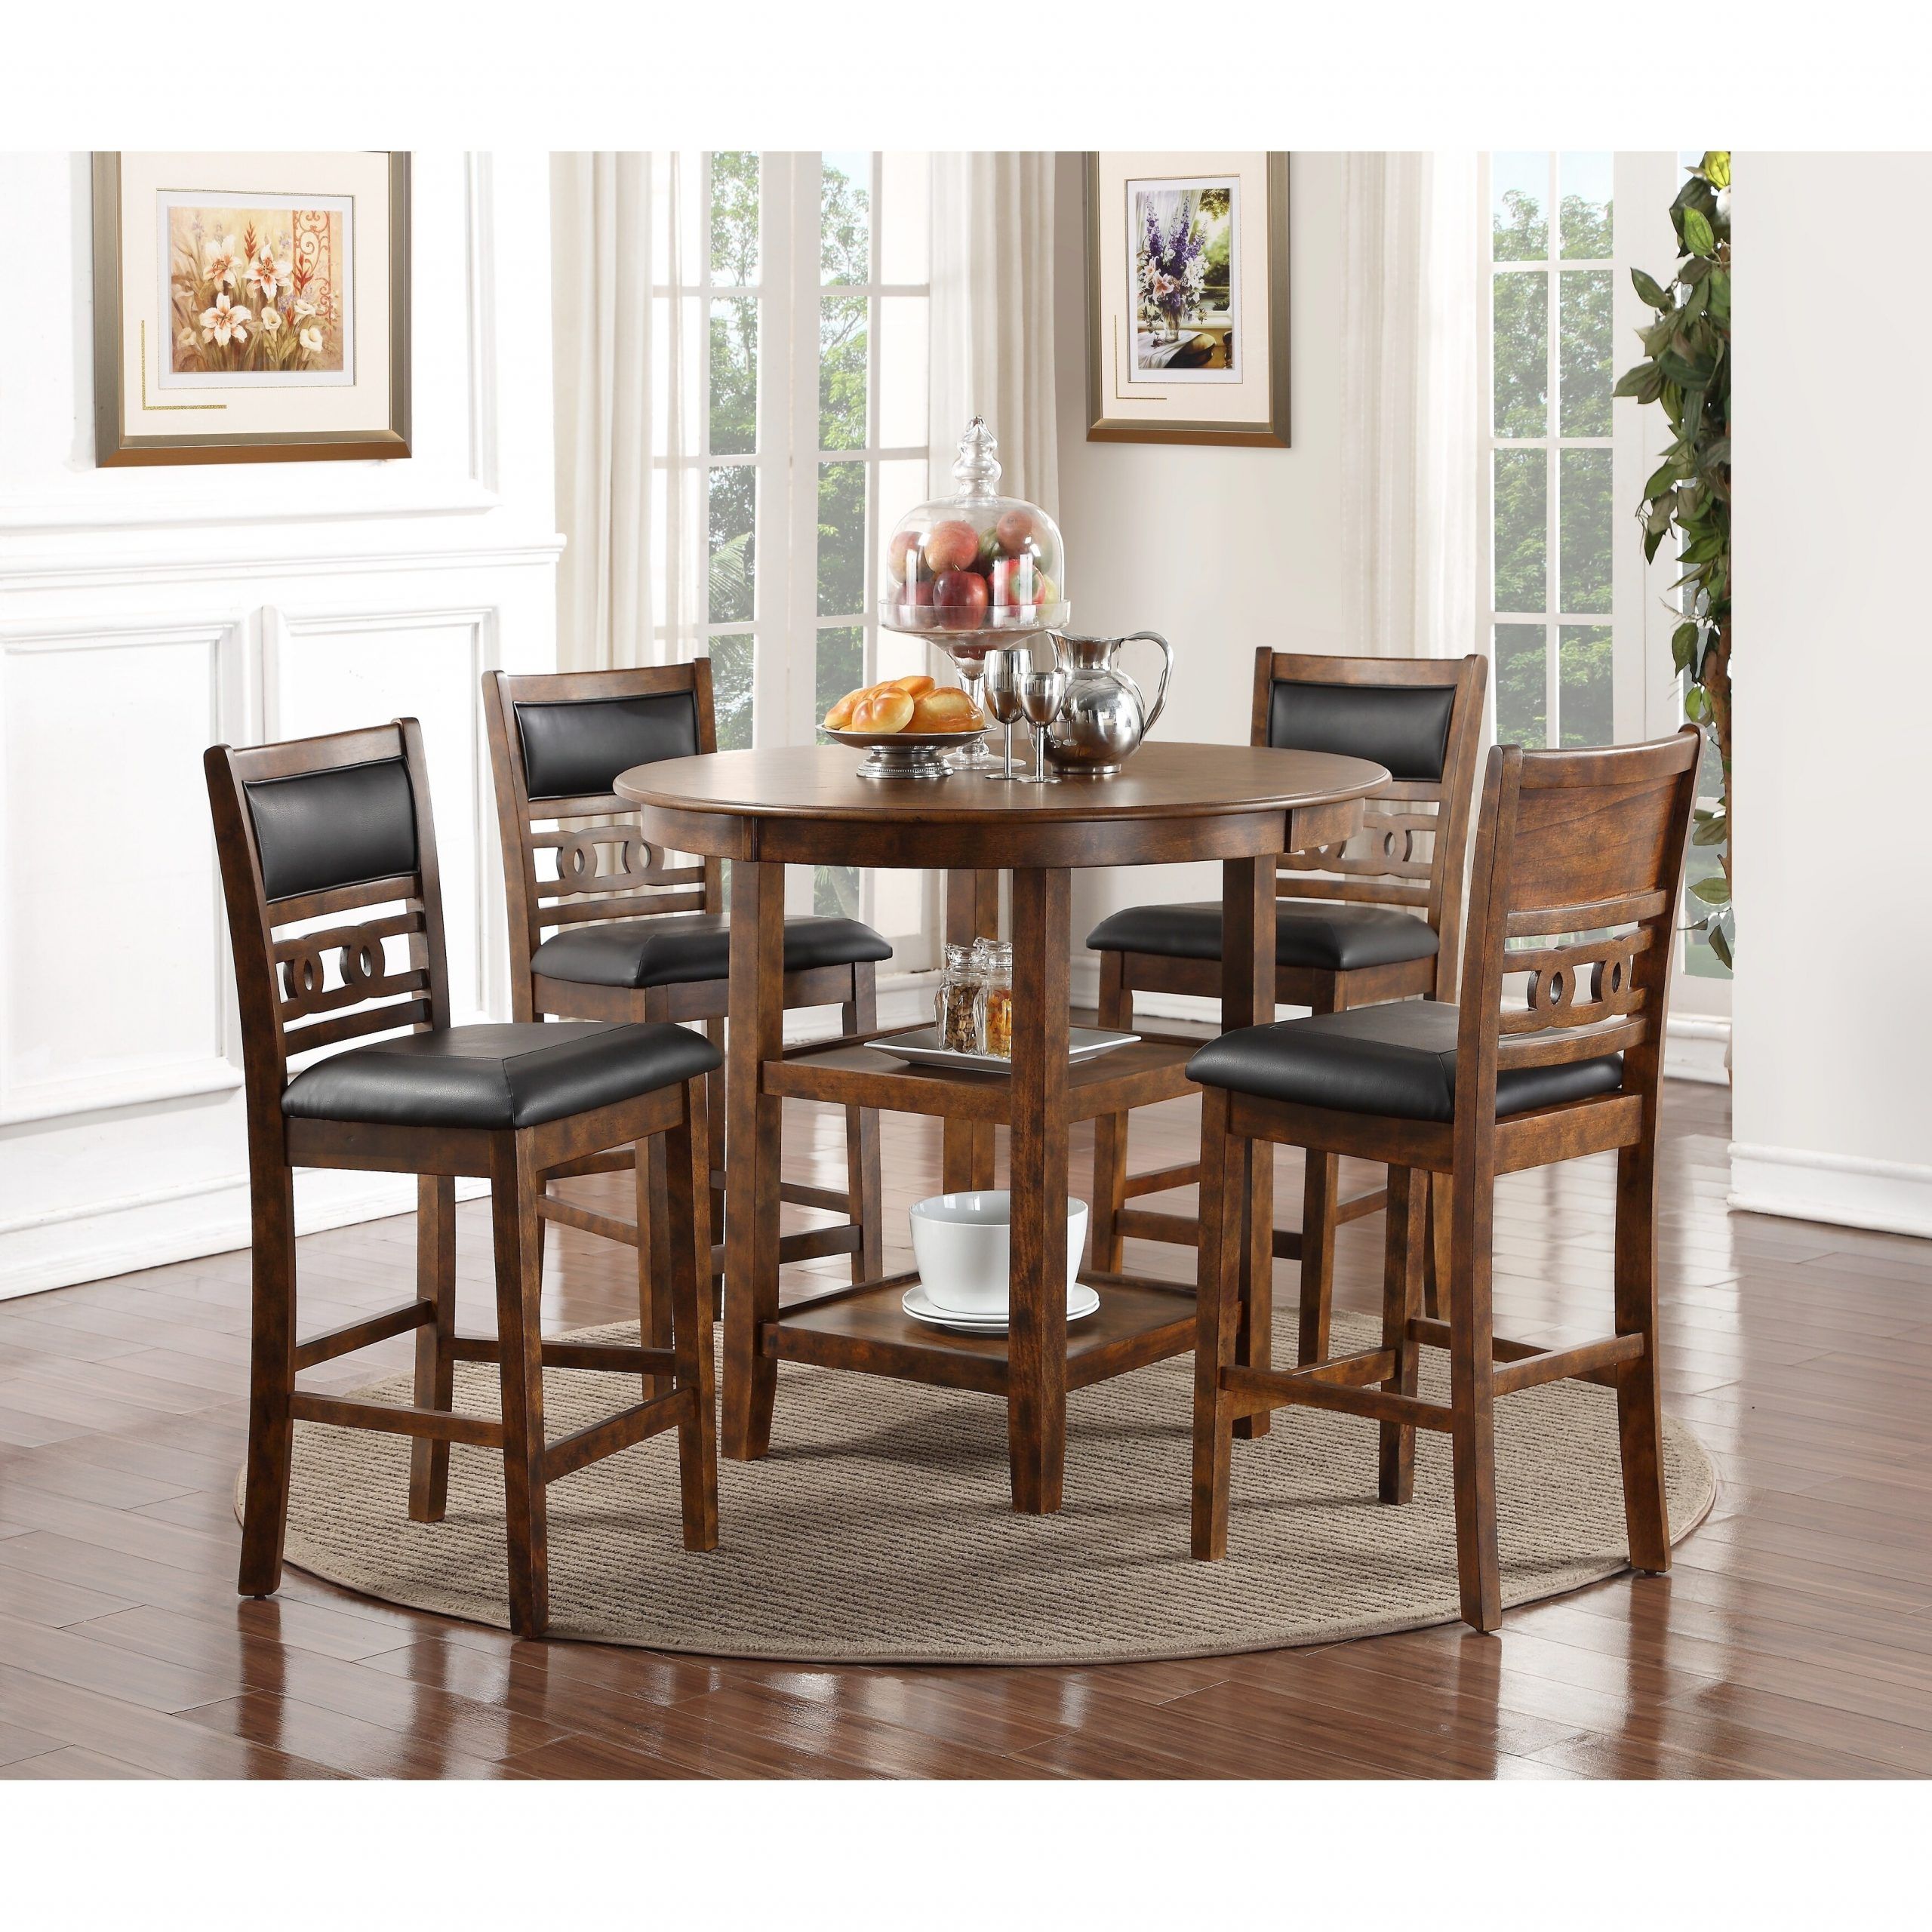 Copper Grove Creteil 5 Piece Round Dining Table Set Brown Intended For 2018 Vintage Brown 48 Inch Round Dining Tables (View 6 of 15)